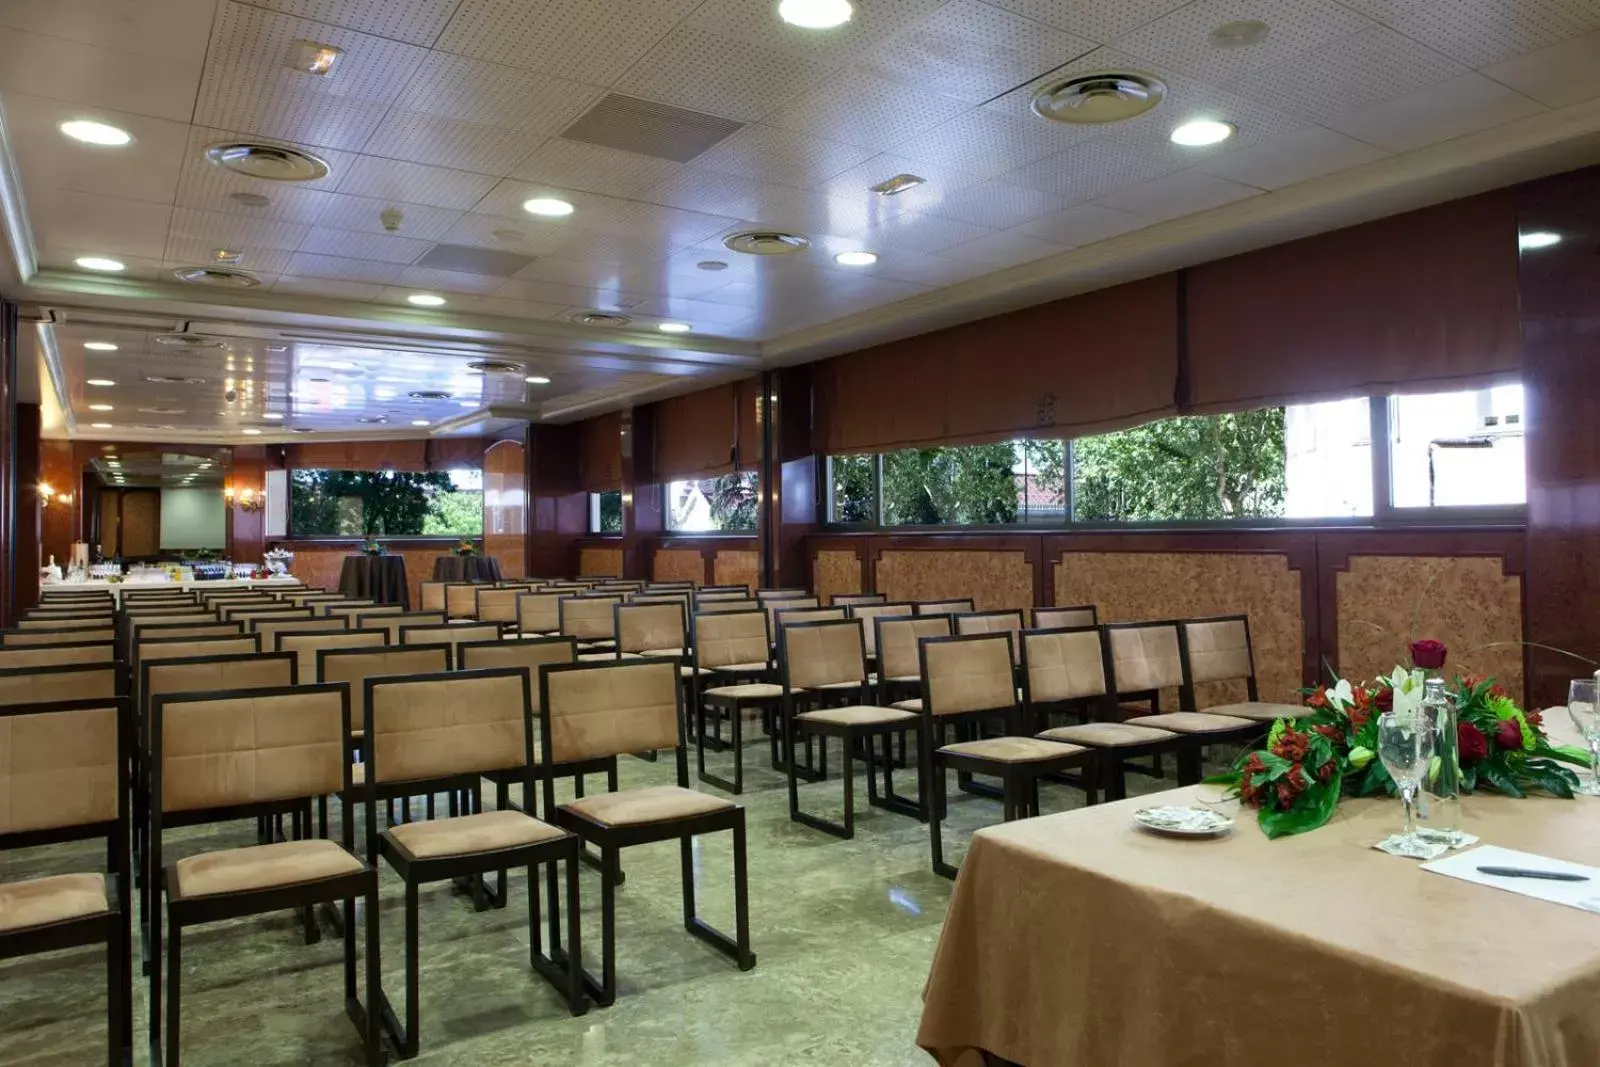 Meeting/conference room in Agumar